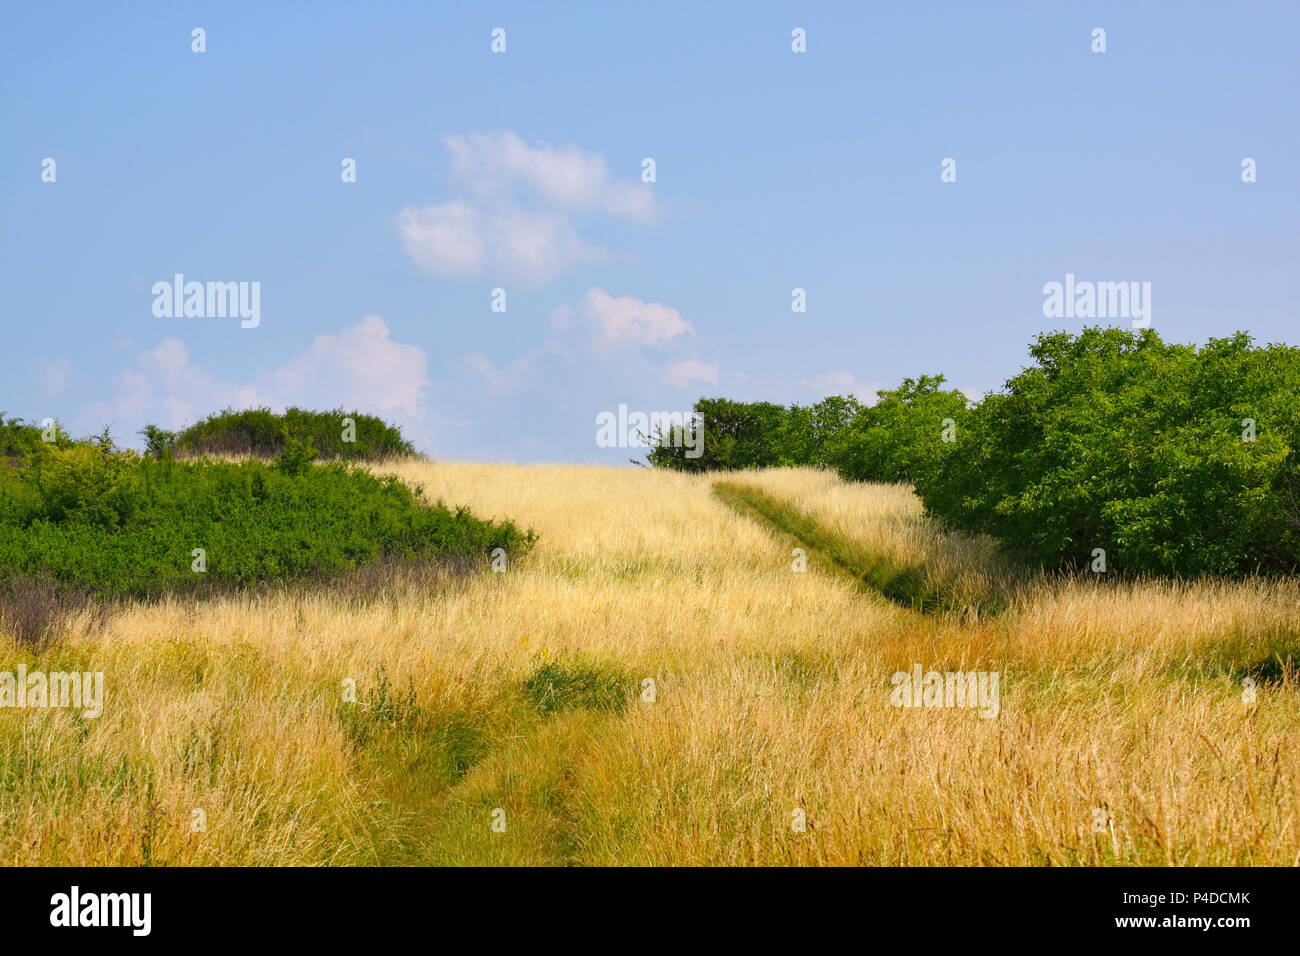 Grassy meadow with bushes. Poland, The Holy Cross Mountains. Stock Photo